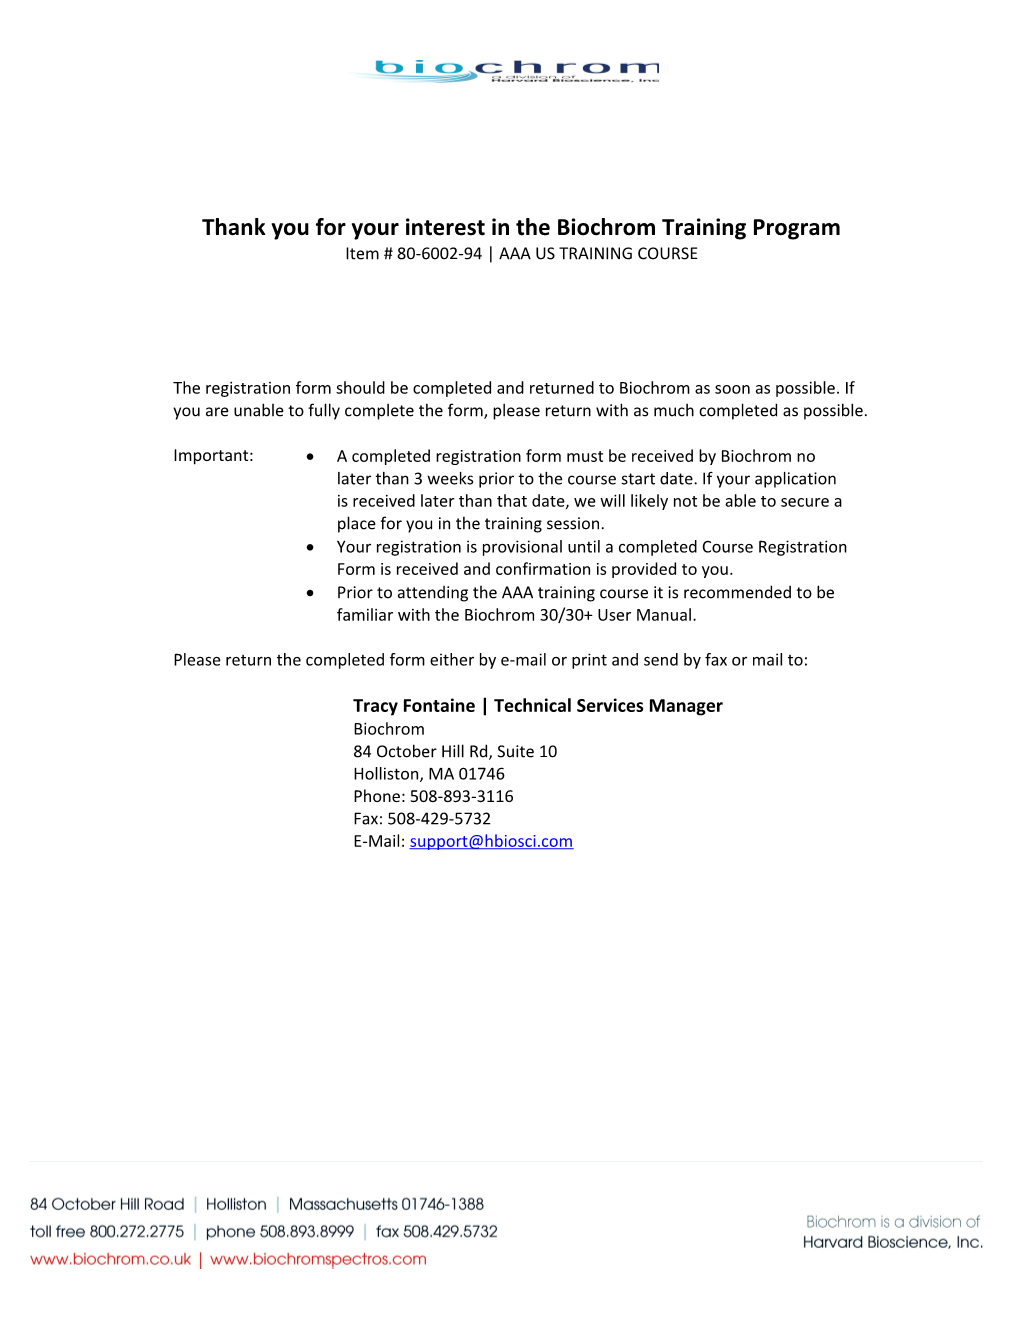 Thank You for Your Interest in the Biochrom Training Program